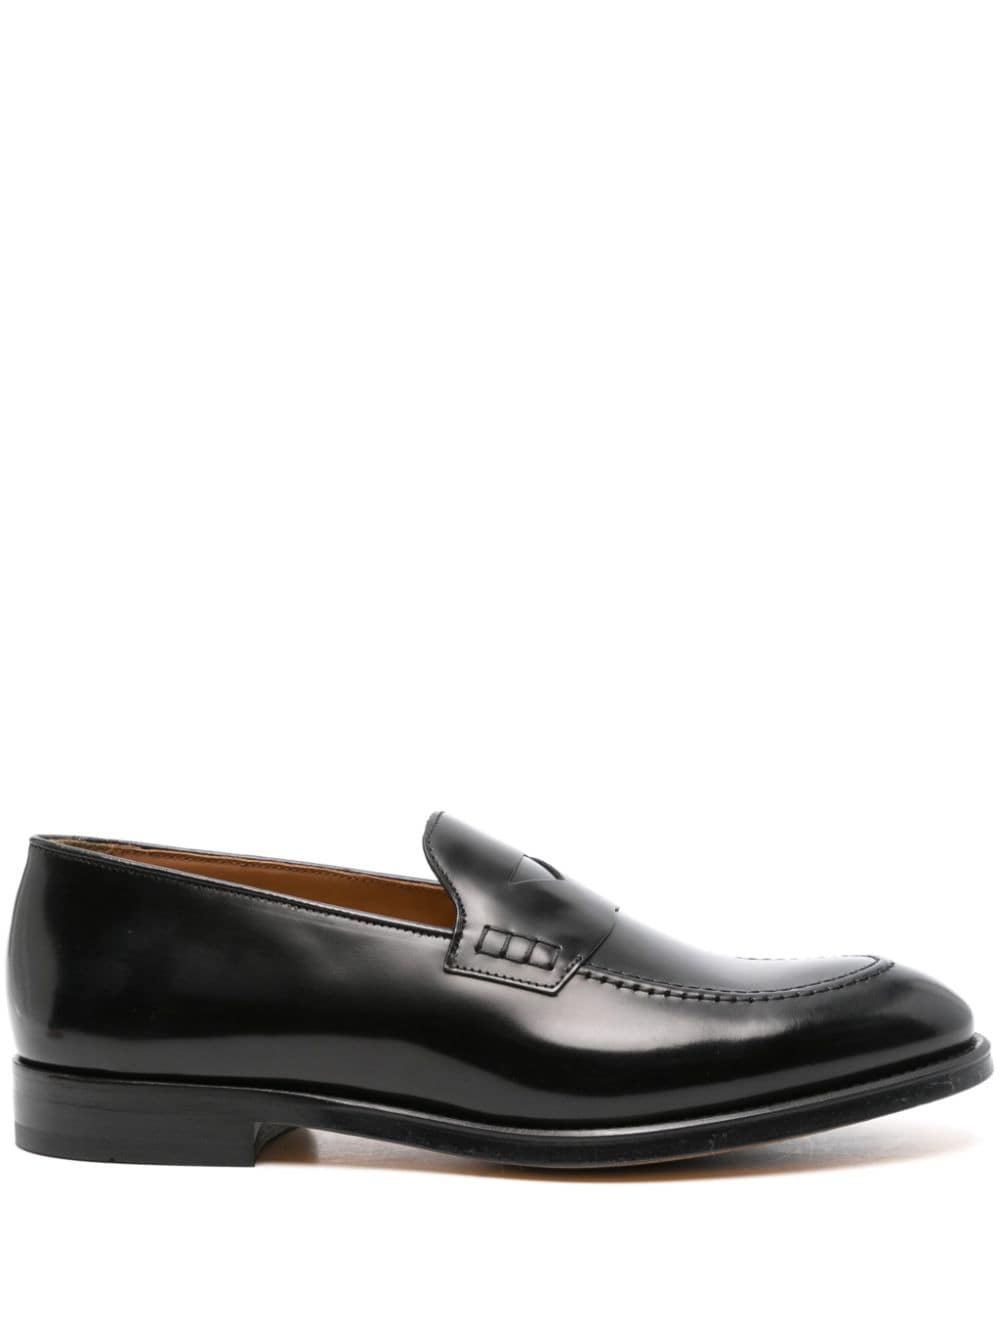 Doucal's leather loafers Black